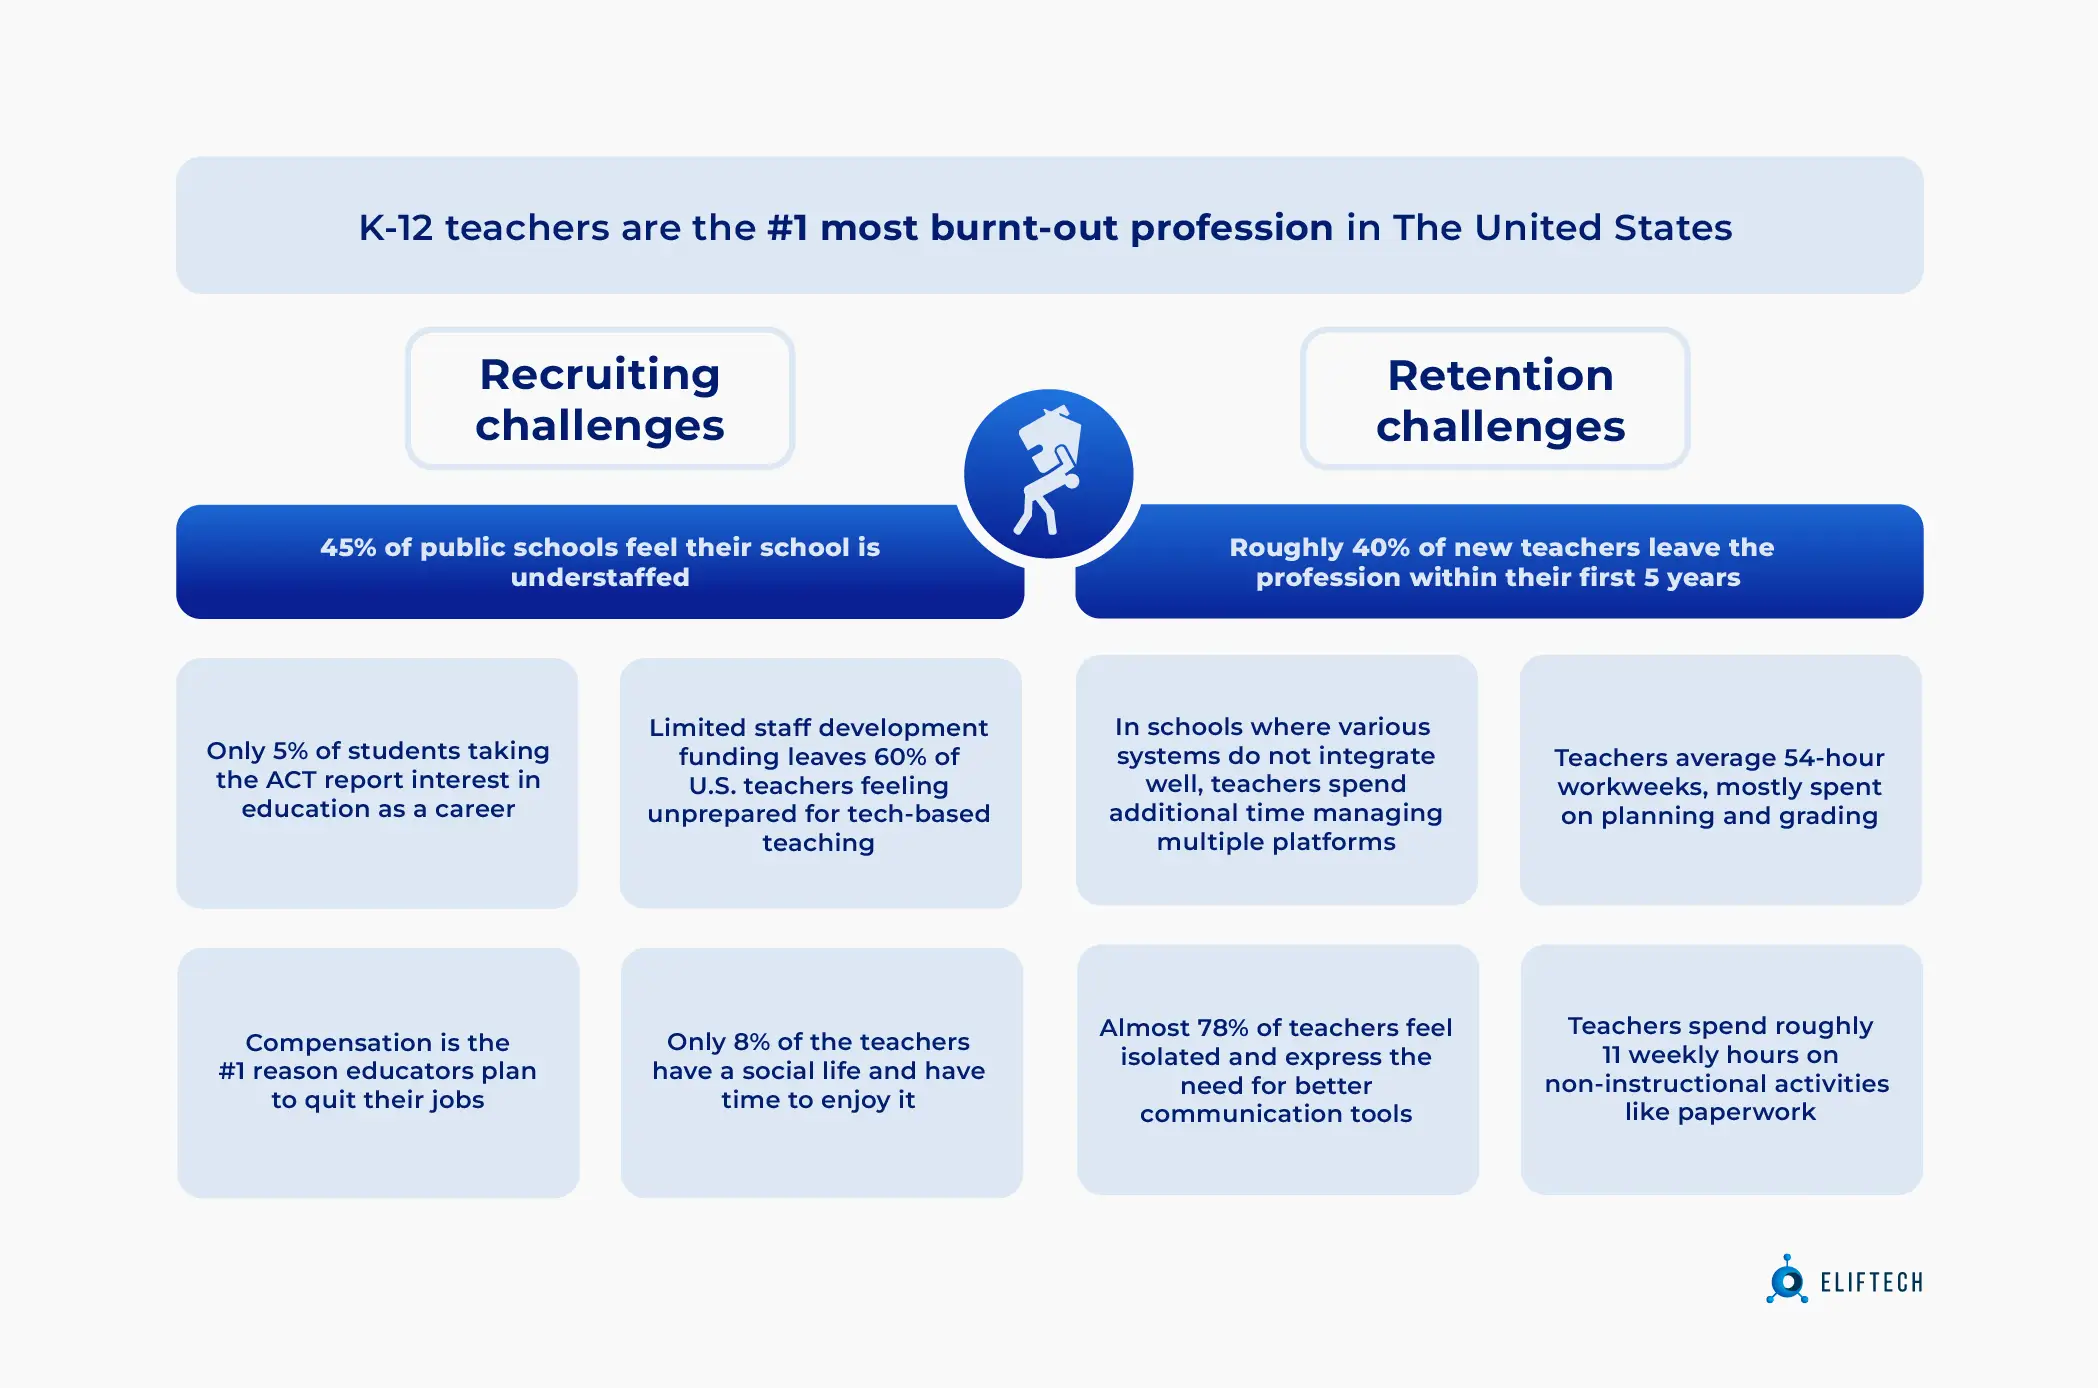 K-12 teacher recruiting and retention challenges